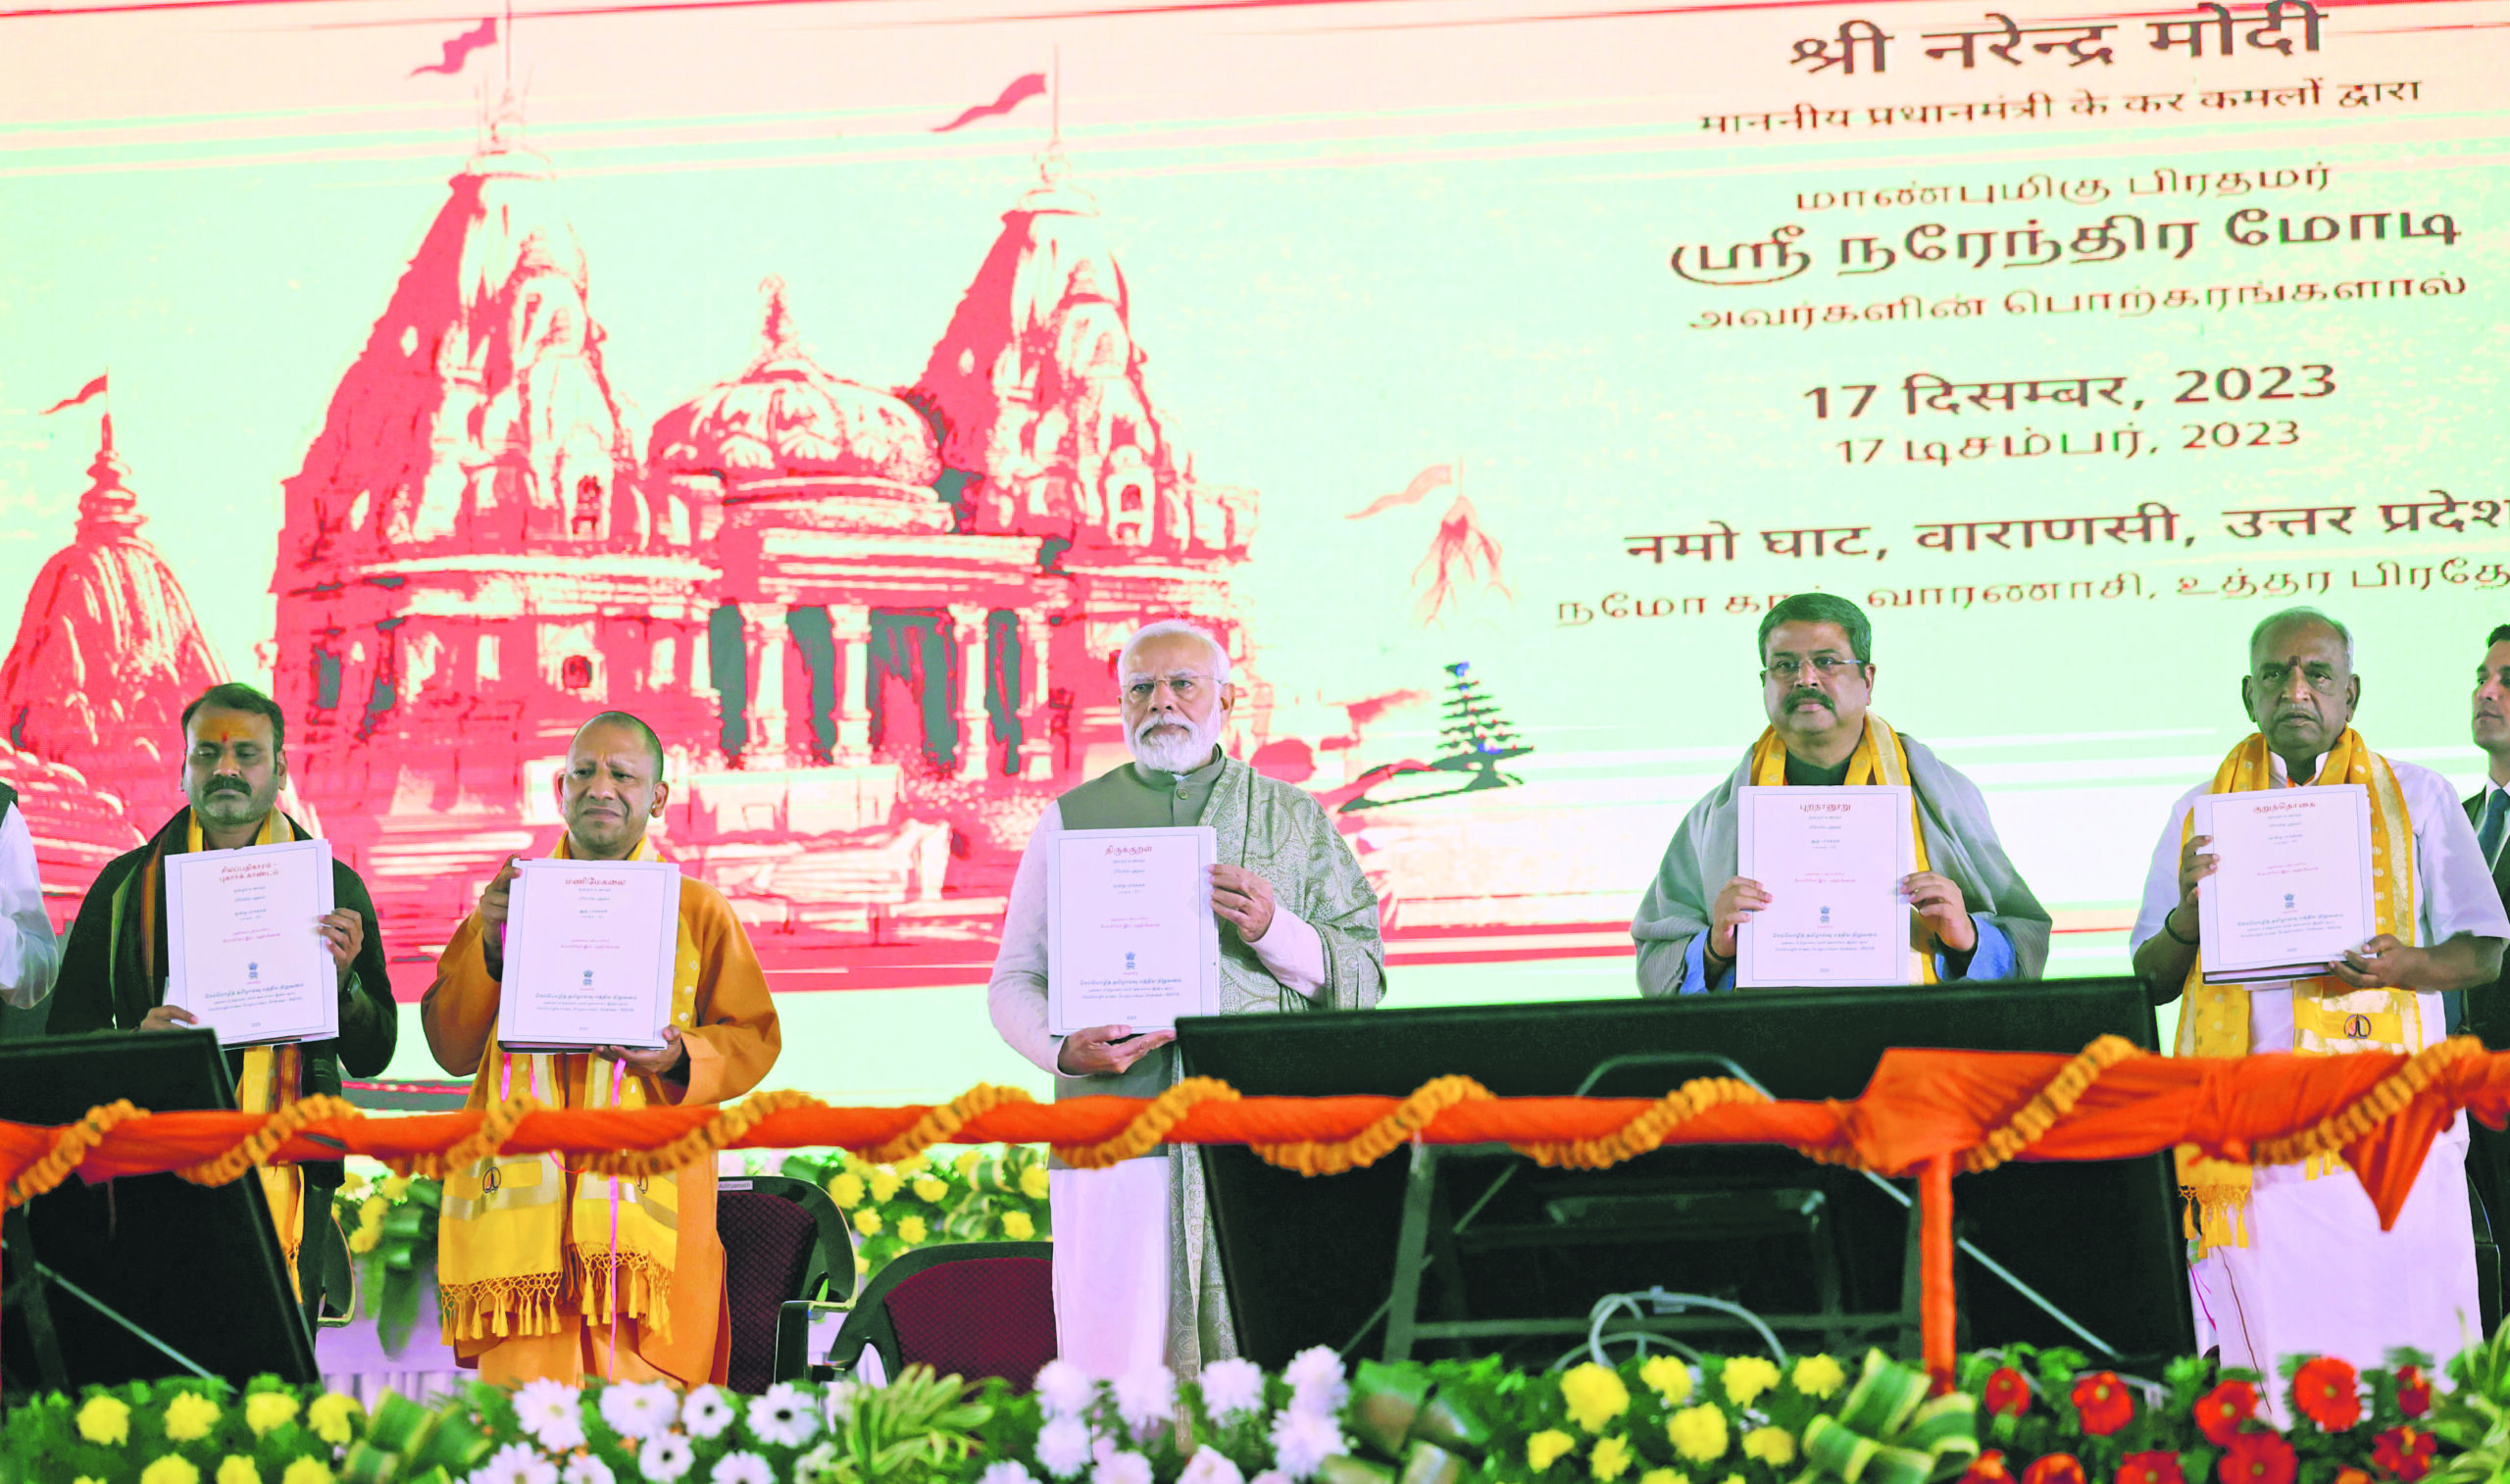 Pm Modi Launches Second Edition Of Kashi Tamil Sangamam Thedailyguardian